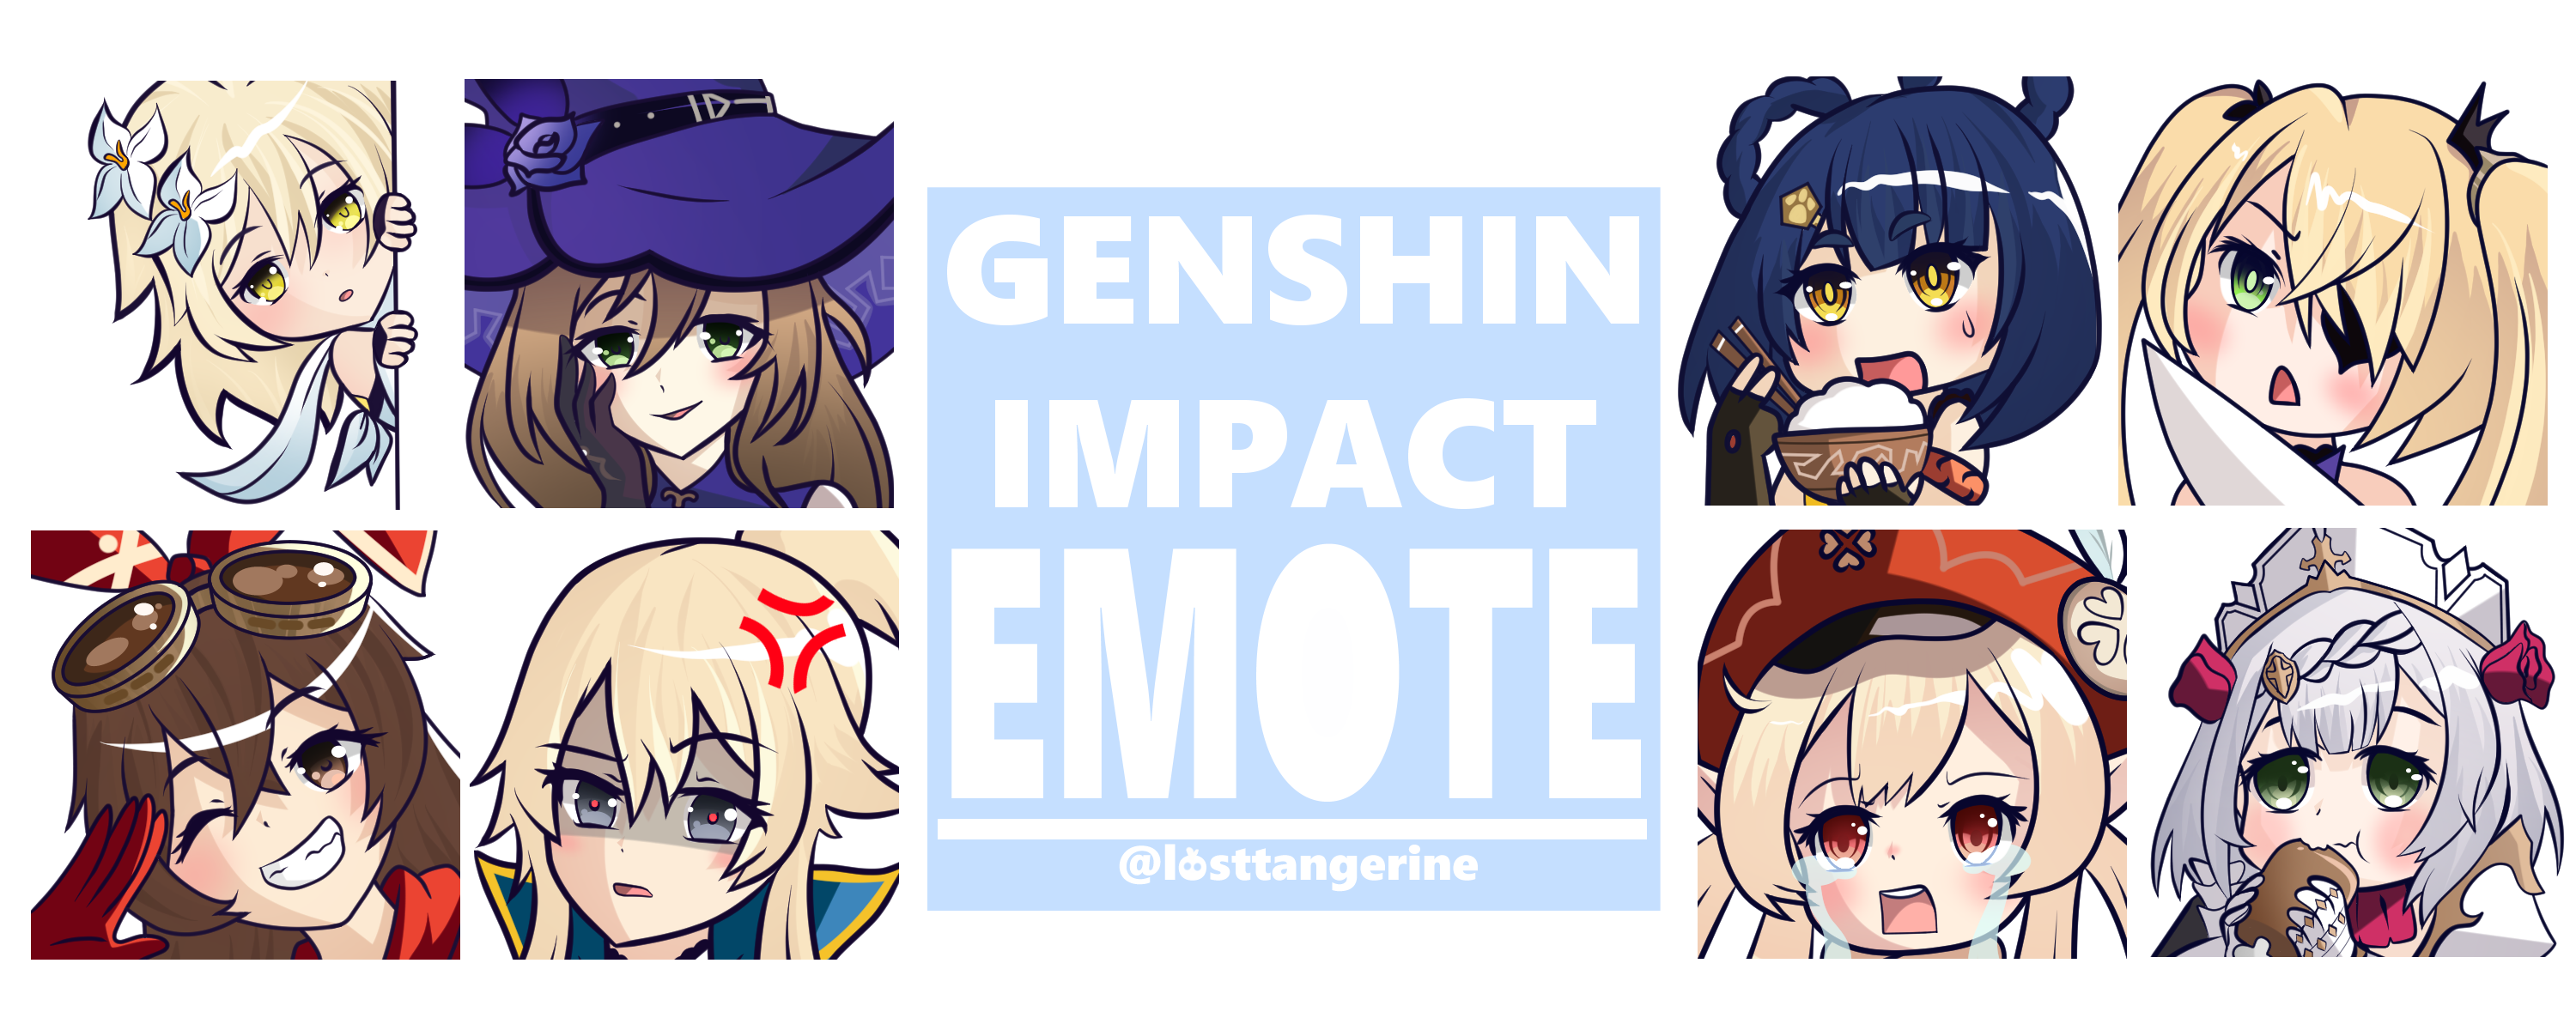 Are There Emotes In Genshin Impact Gaming Section Magazine Gaming E Sport Jeux Video Reviews Trucs Astuces